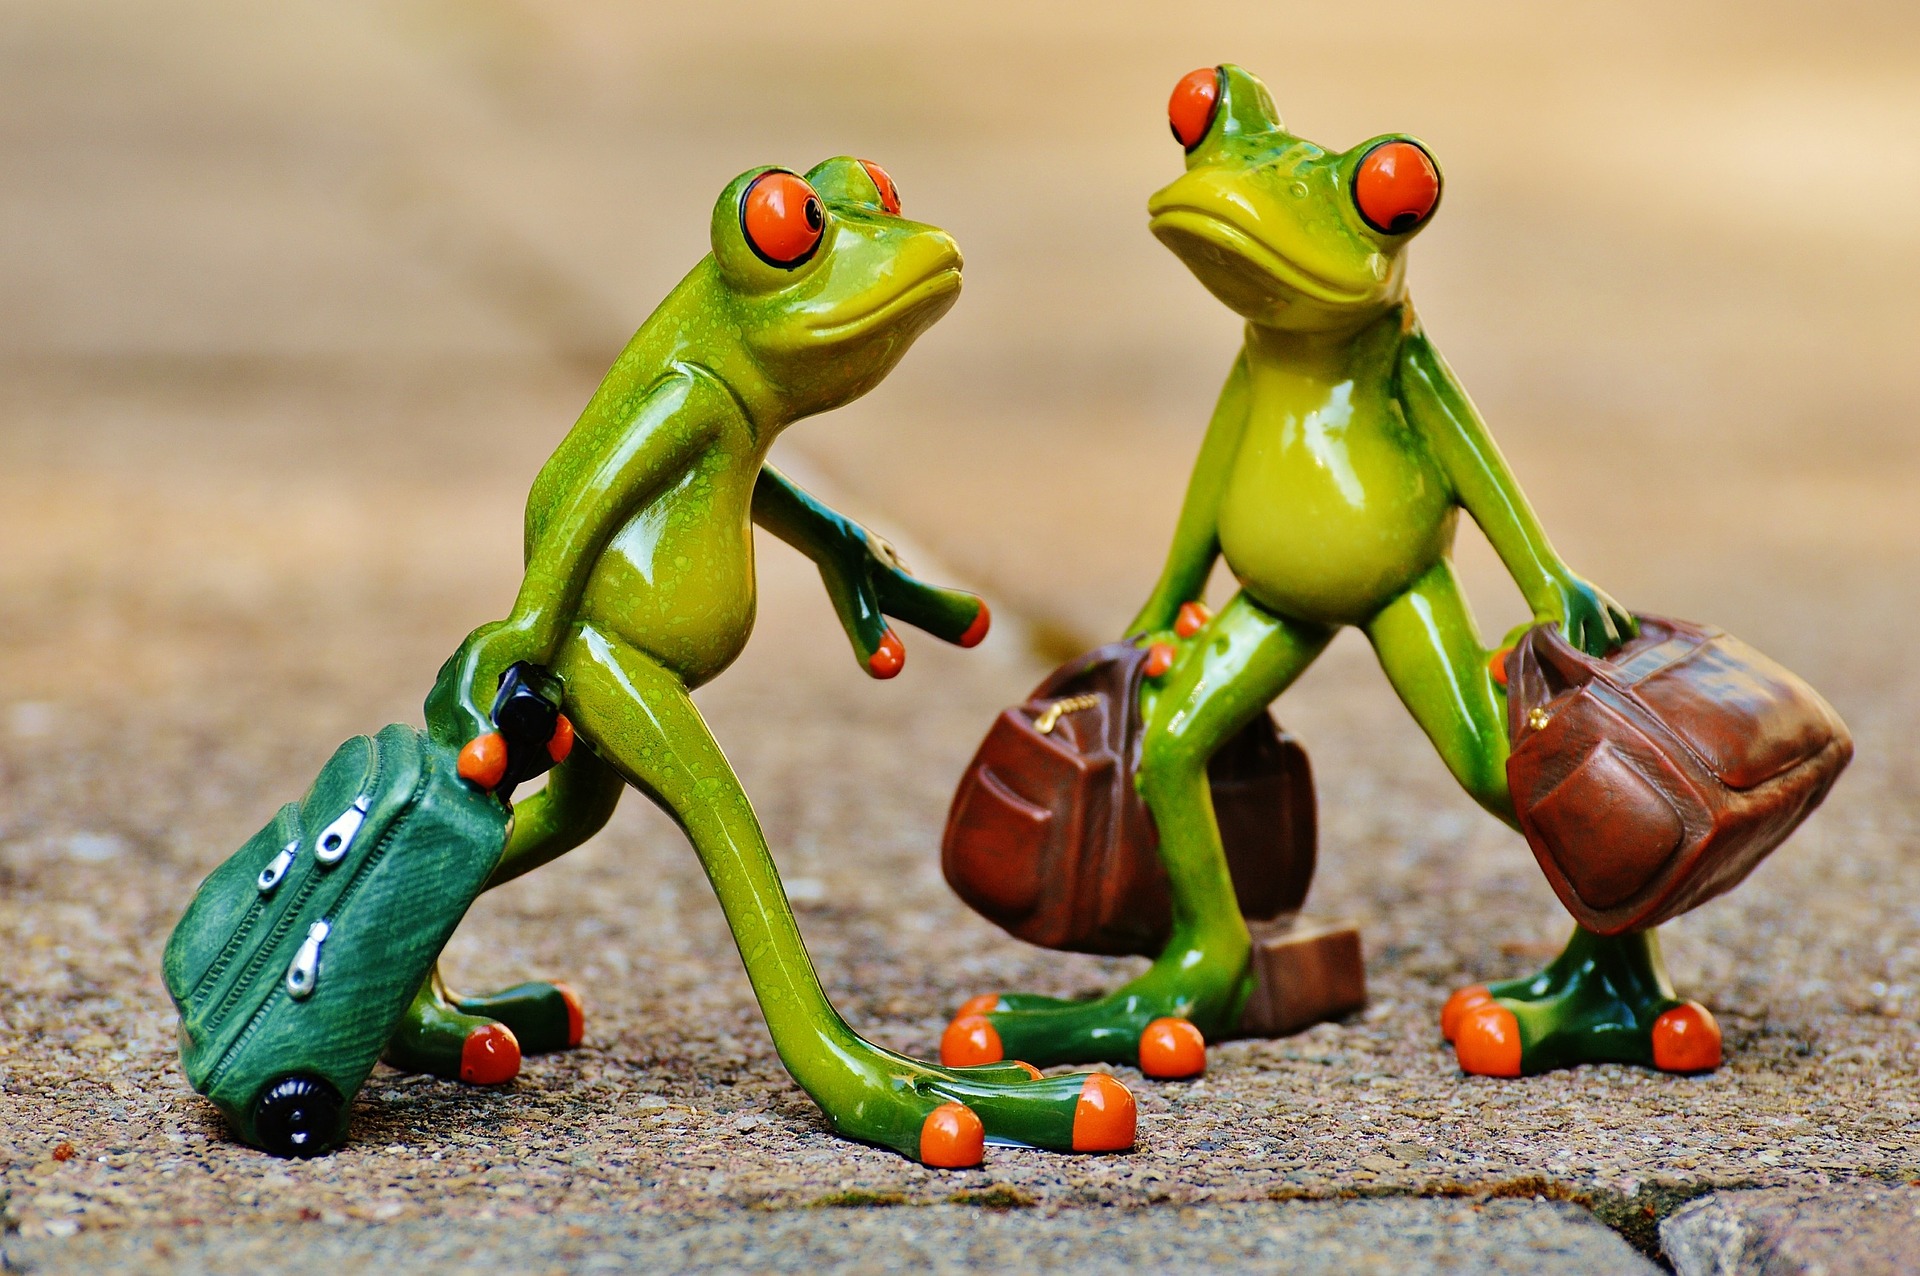 Two frog figurines. One is pulling a cabin bag. The other has one bag in each hand.